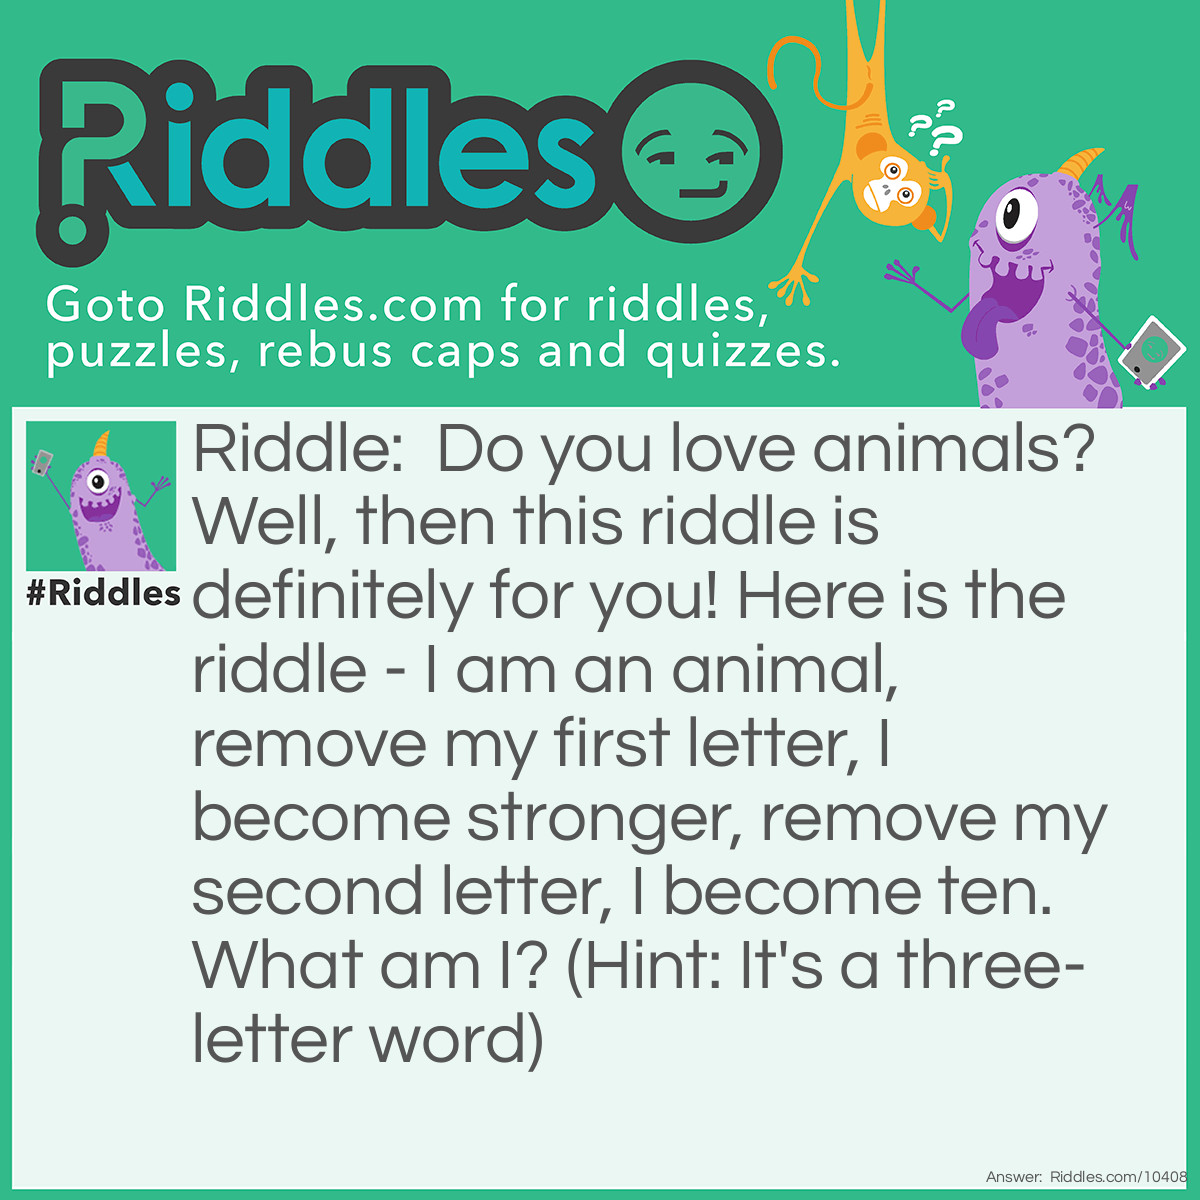 Riddle: Do you love animals? Well, then this riddle is definitely for you! Here is the riddle - I am an animal, remove my first letter, I become stronger, remove my second letter, I become ten. What am I? (Hint: It's a three-letter word) Answer: It's a fox! If you remove the first letter which is f, you get ox! An ox is much stronger then a fox. And if you remove the second letter which is o, you get x! Now, here is the puzzle! How is X meant as 10/ten?! Well, well, well, in roman numerals!